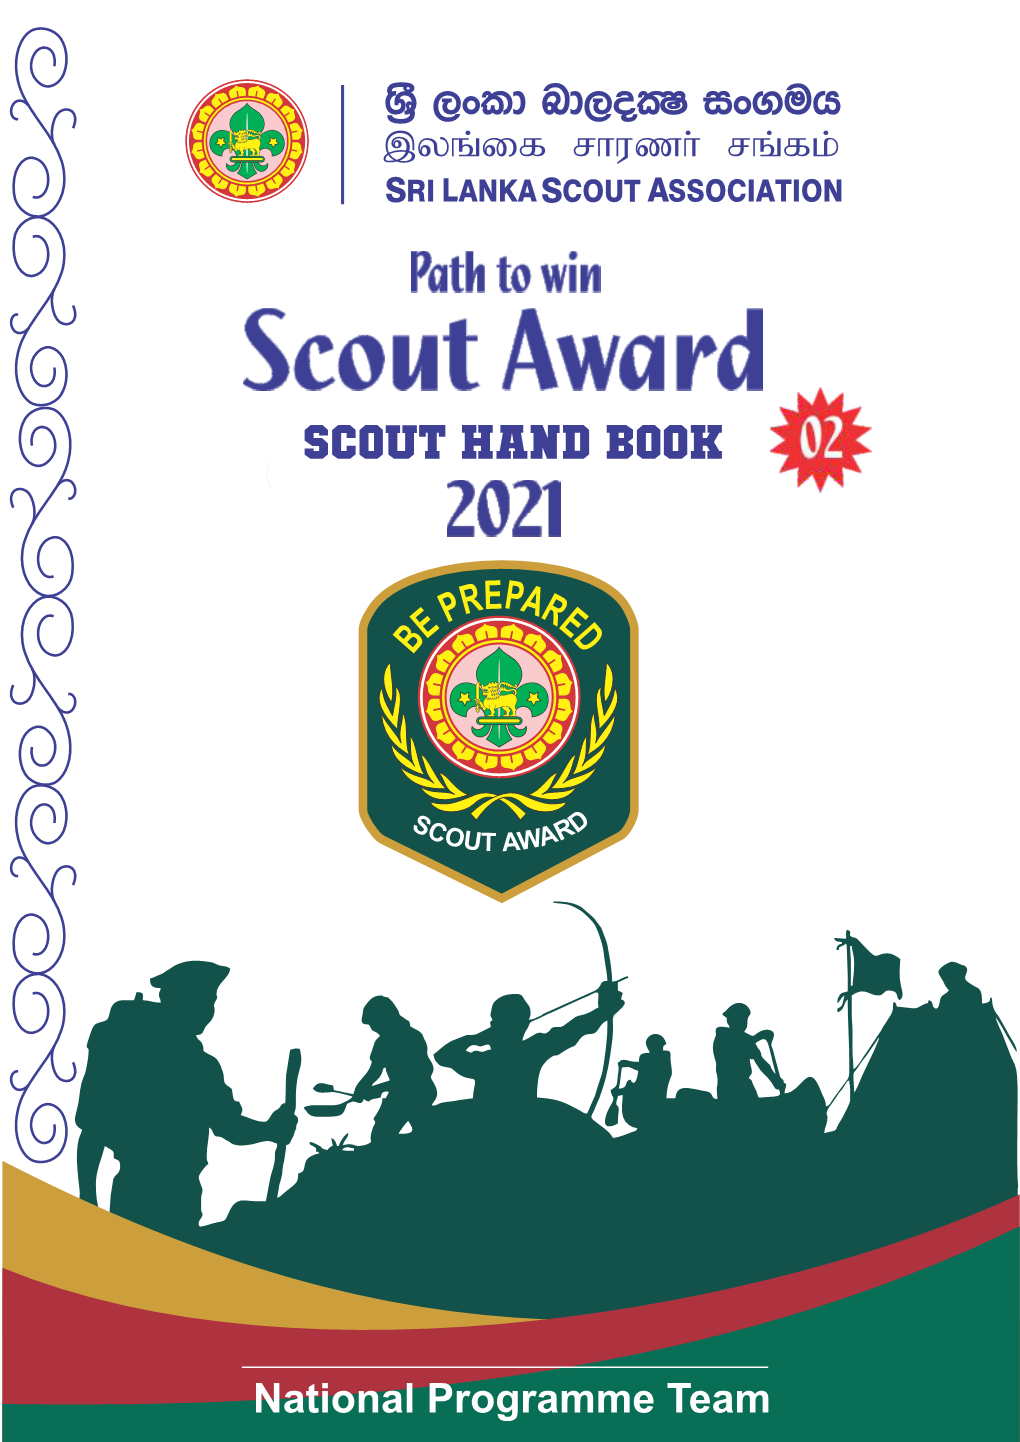 Path to Win the SCOUT AWARD